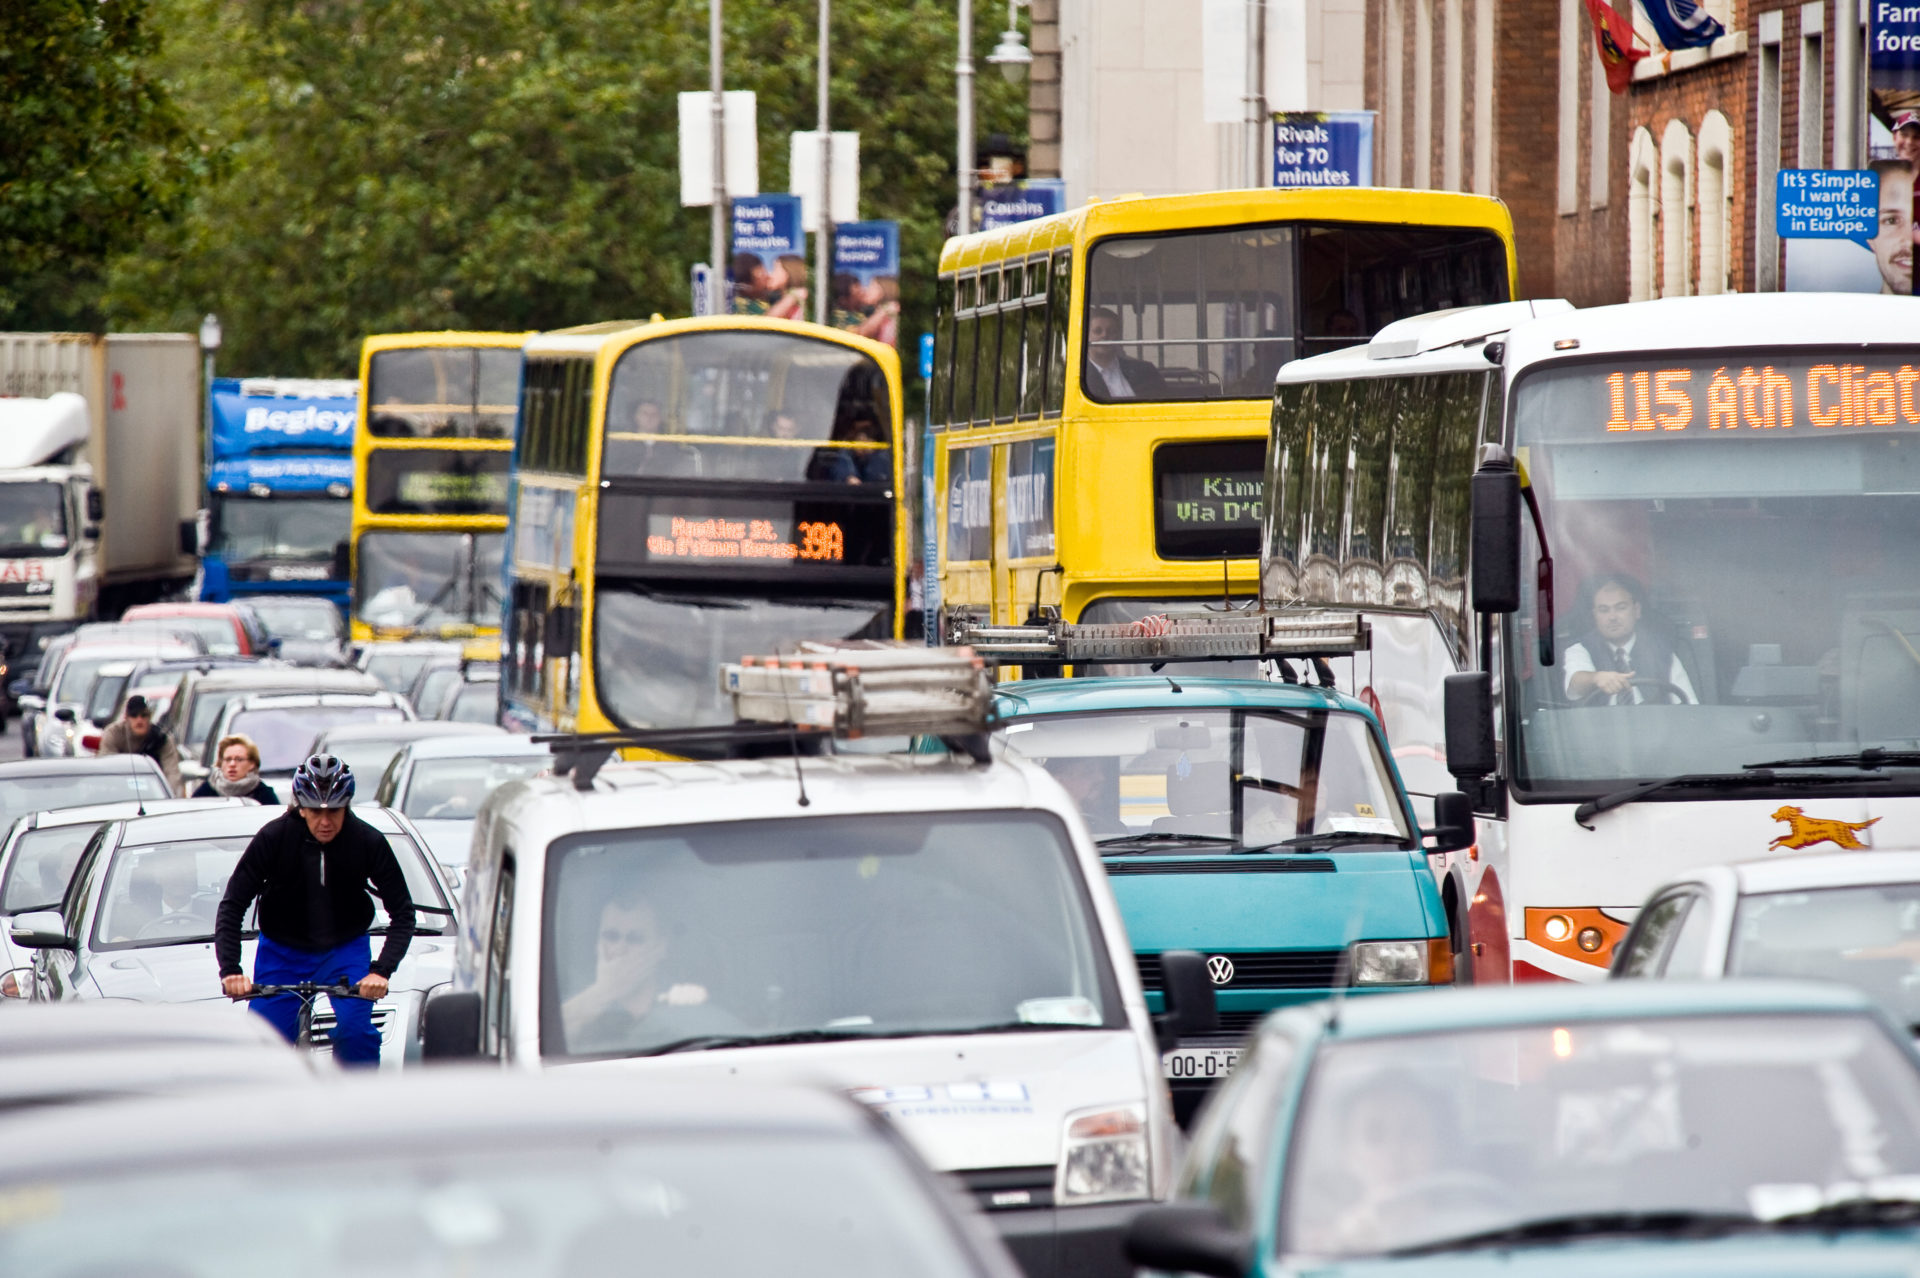 Dublin is the second slowest city in the world